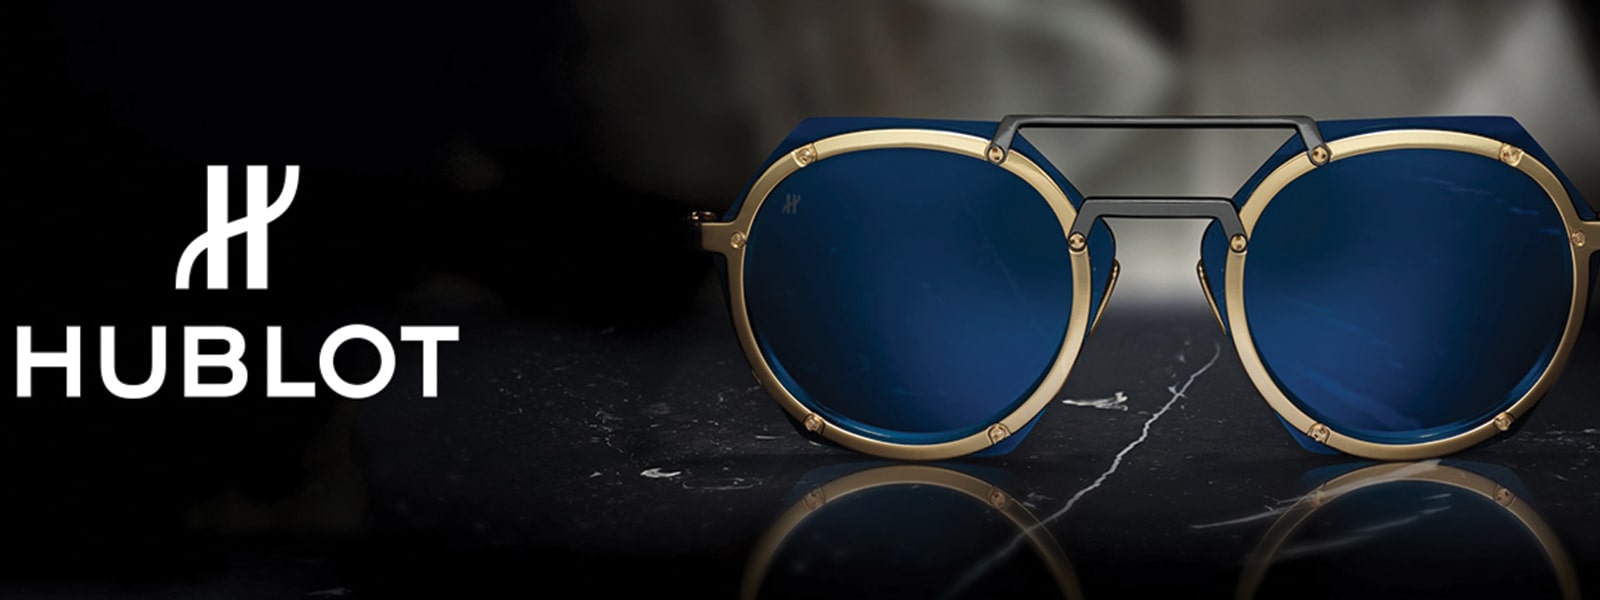 Boost your Style with Hublot Eyewear Sunglasses